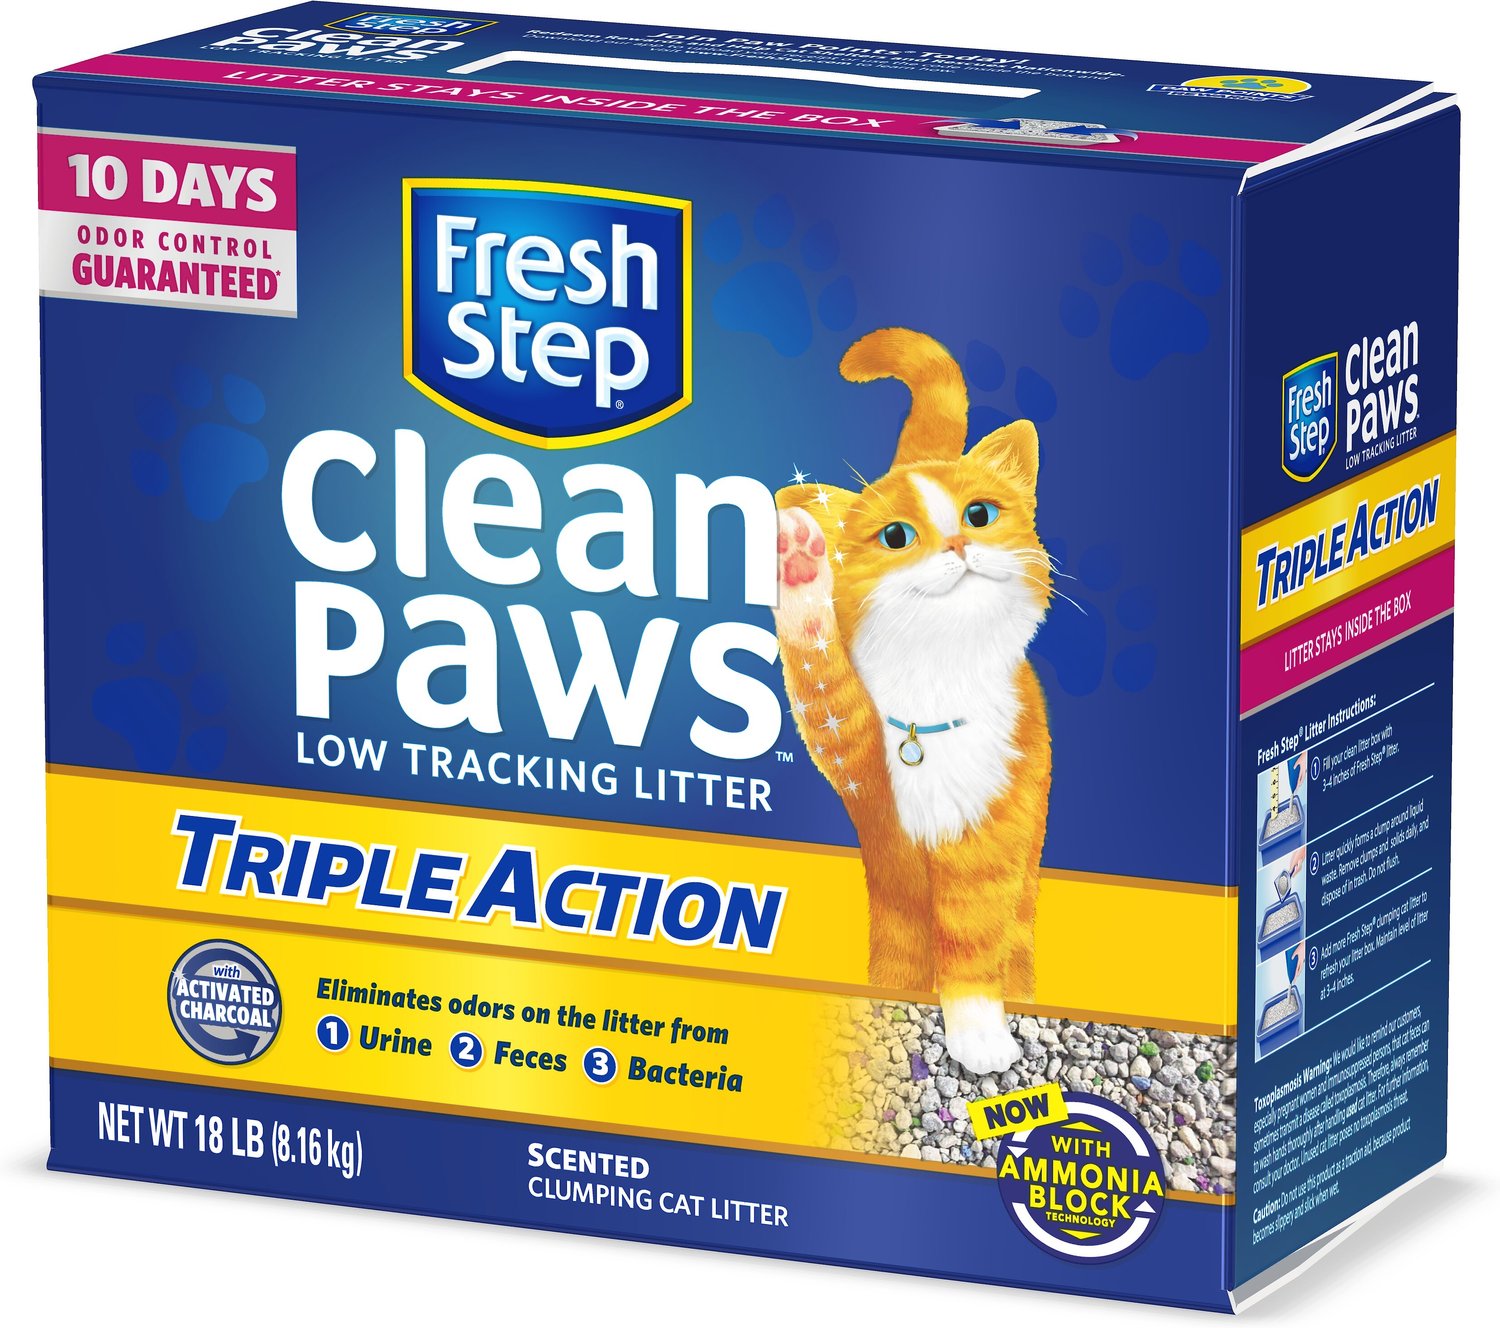 FRESH STEP Clean Paws Scented Clumping Clay Cat Litter, 18lb box